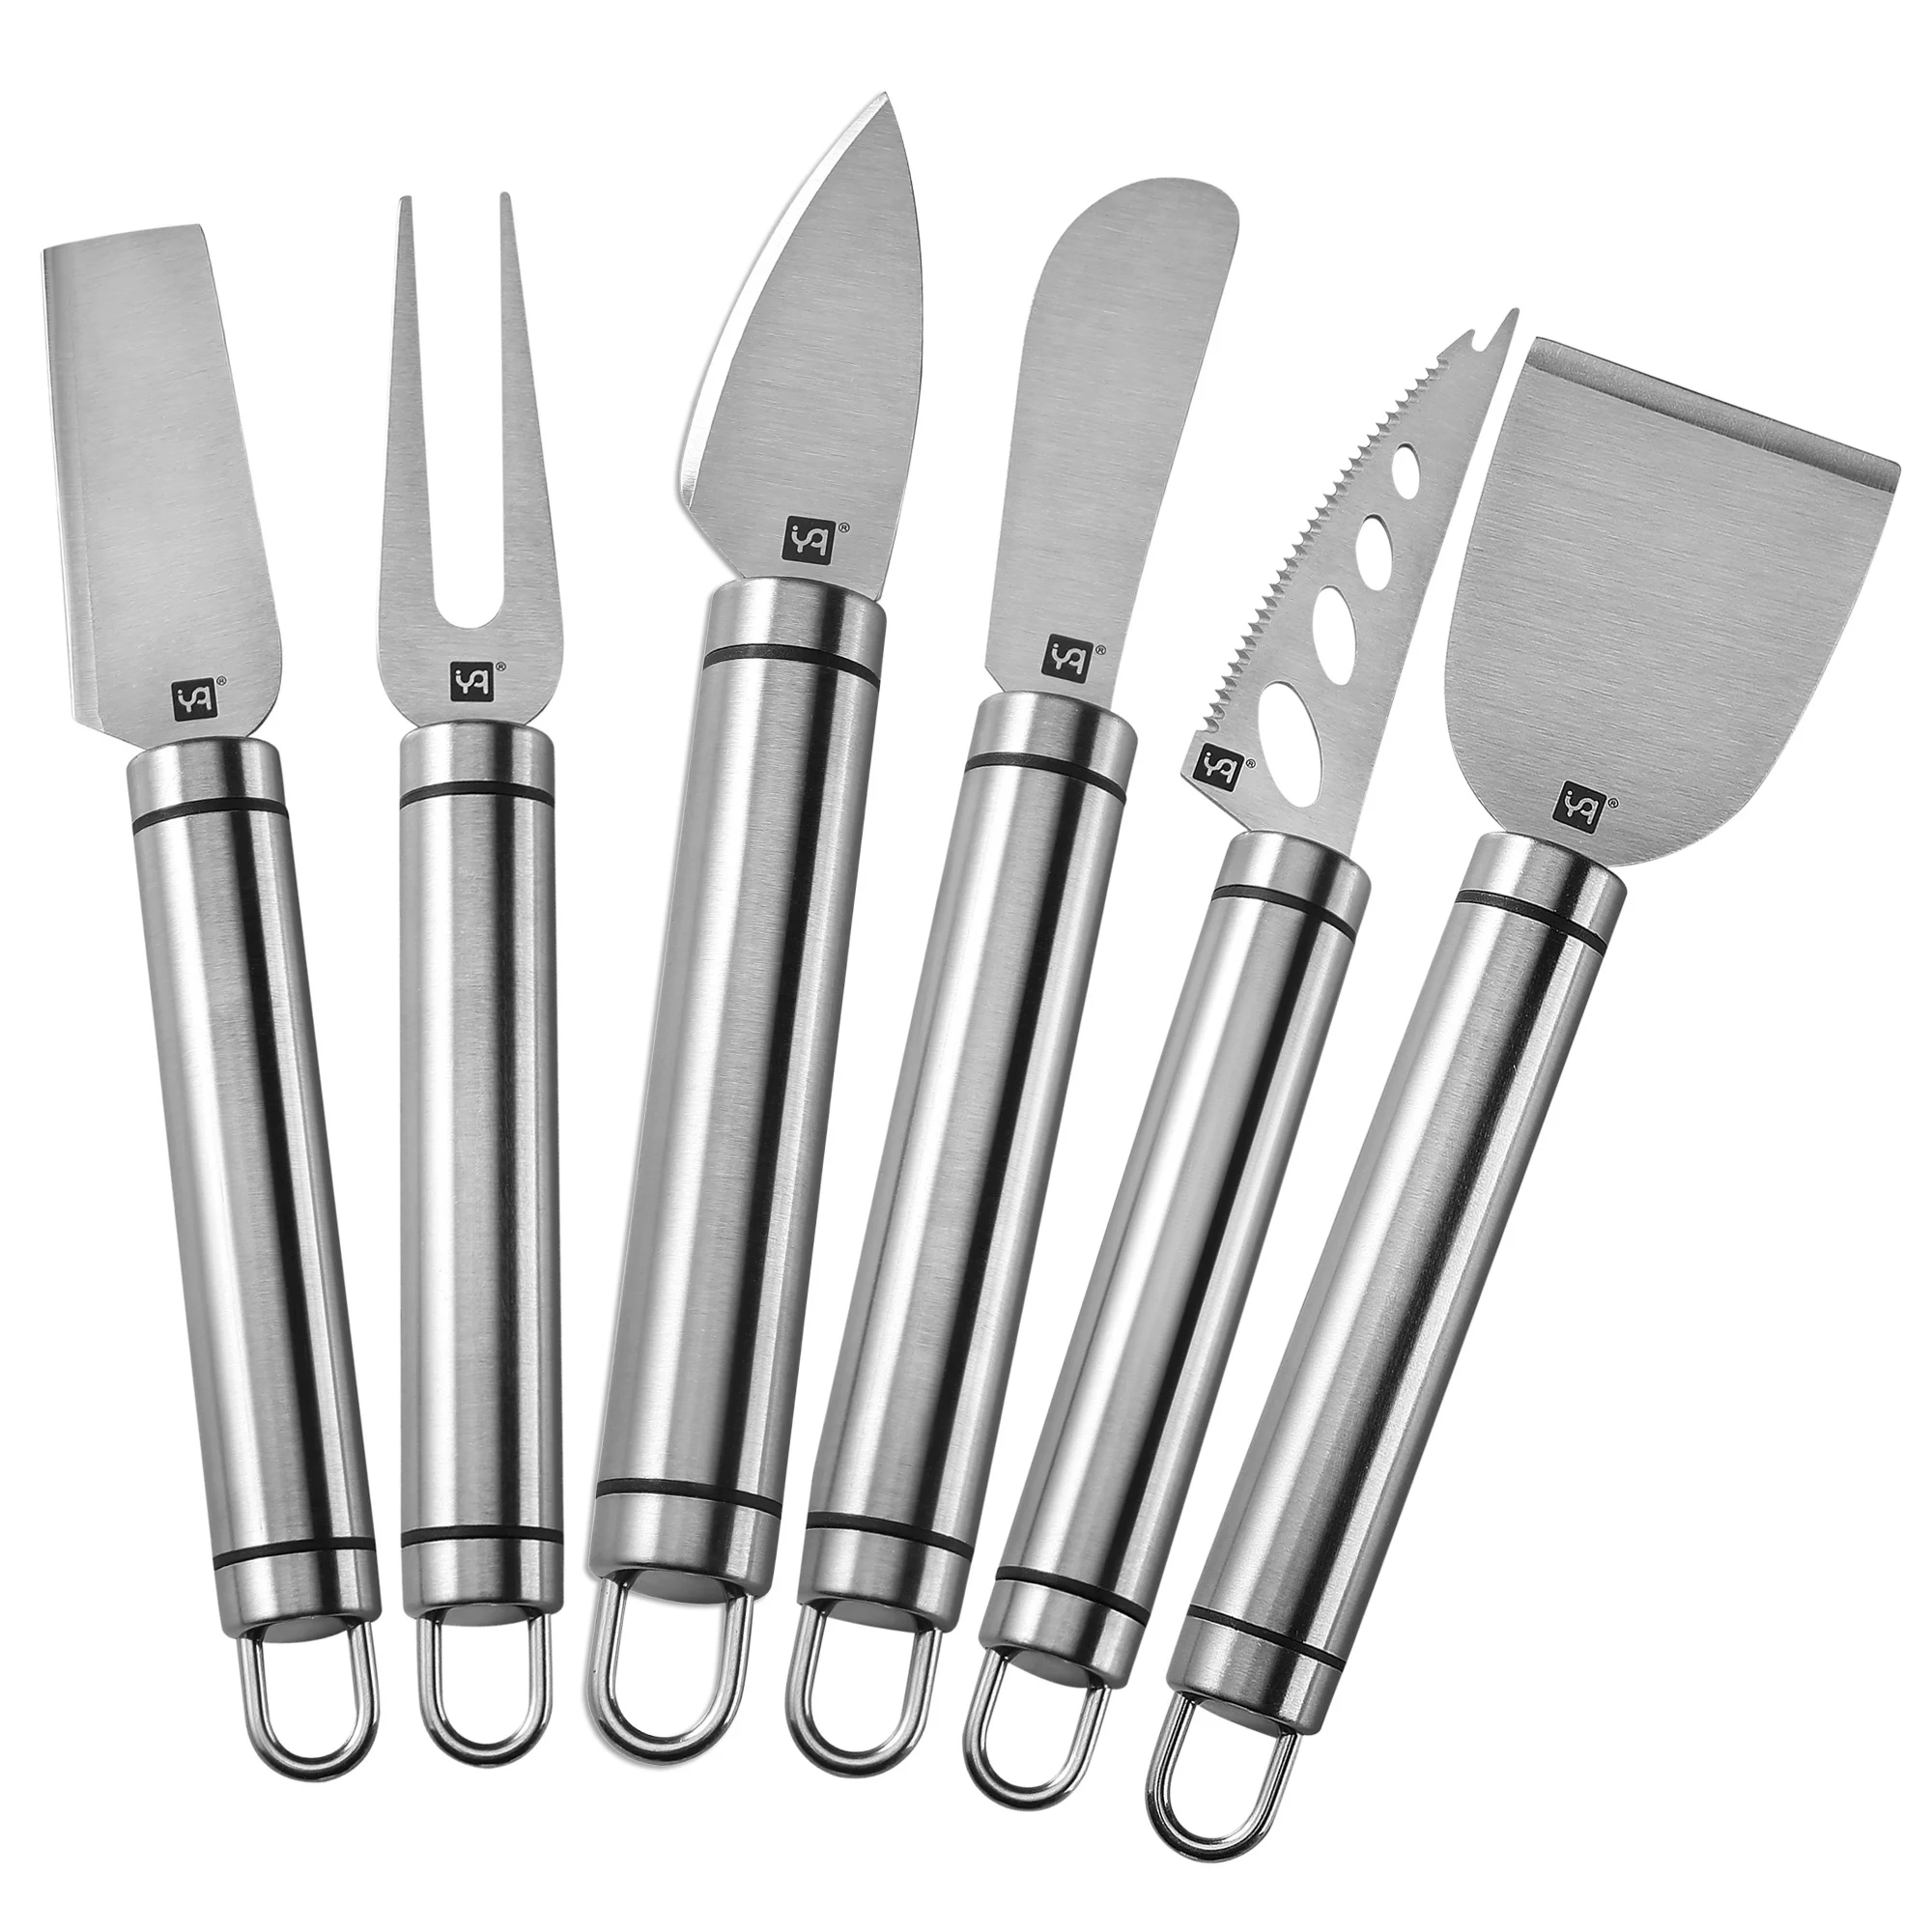 

YQ High Grade Exquisite Cheese Knife Set Butter Slicing Spatula Bread Jam Cooking Tools Kitchen Utensils